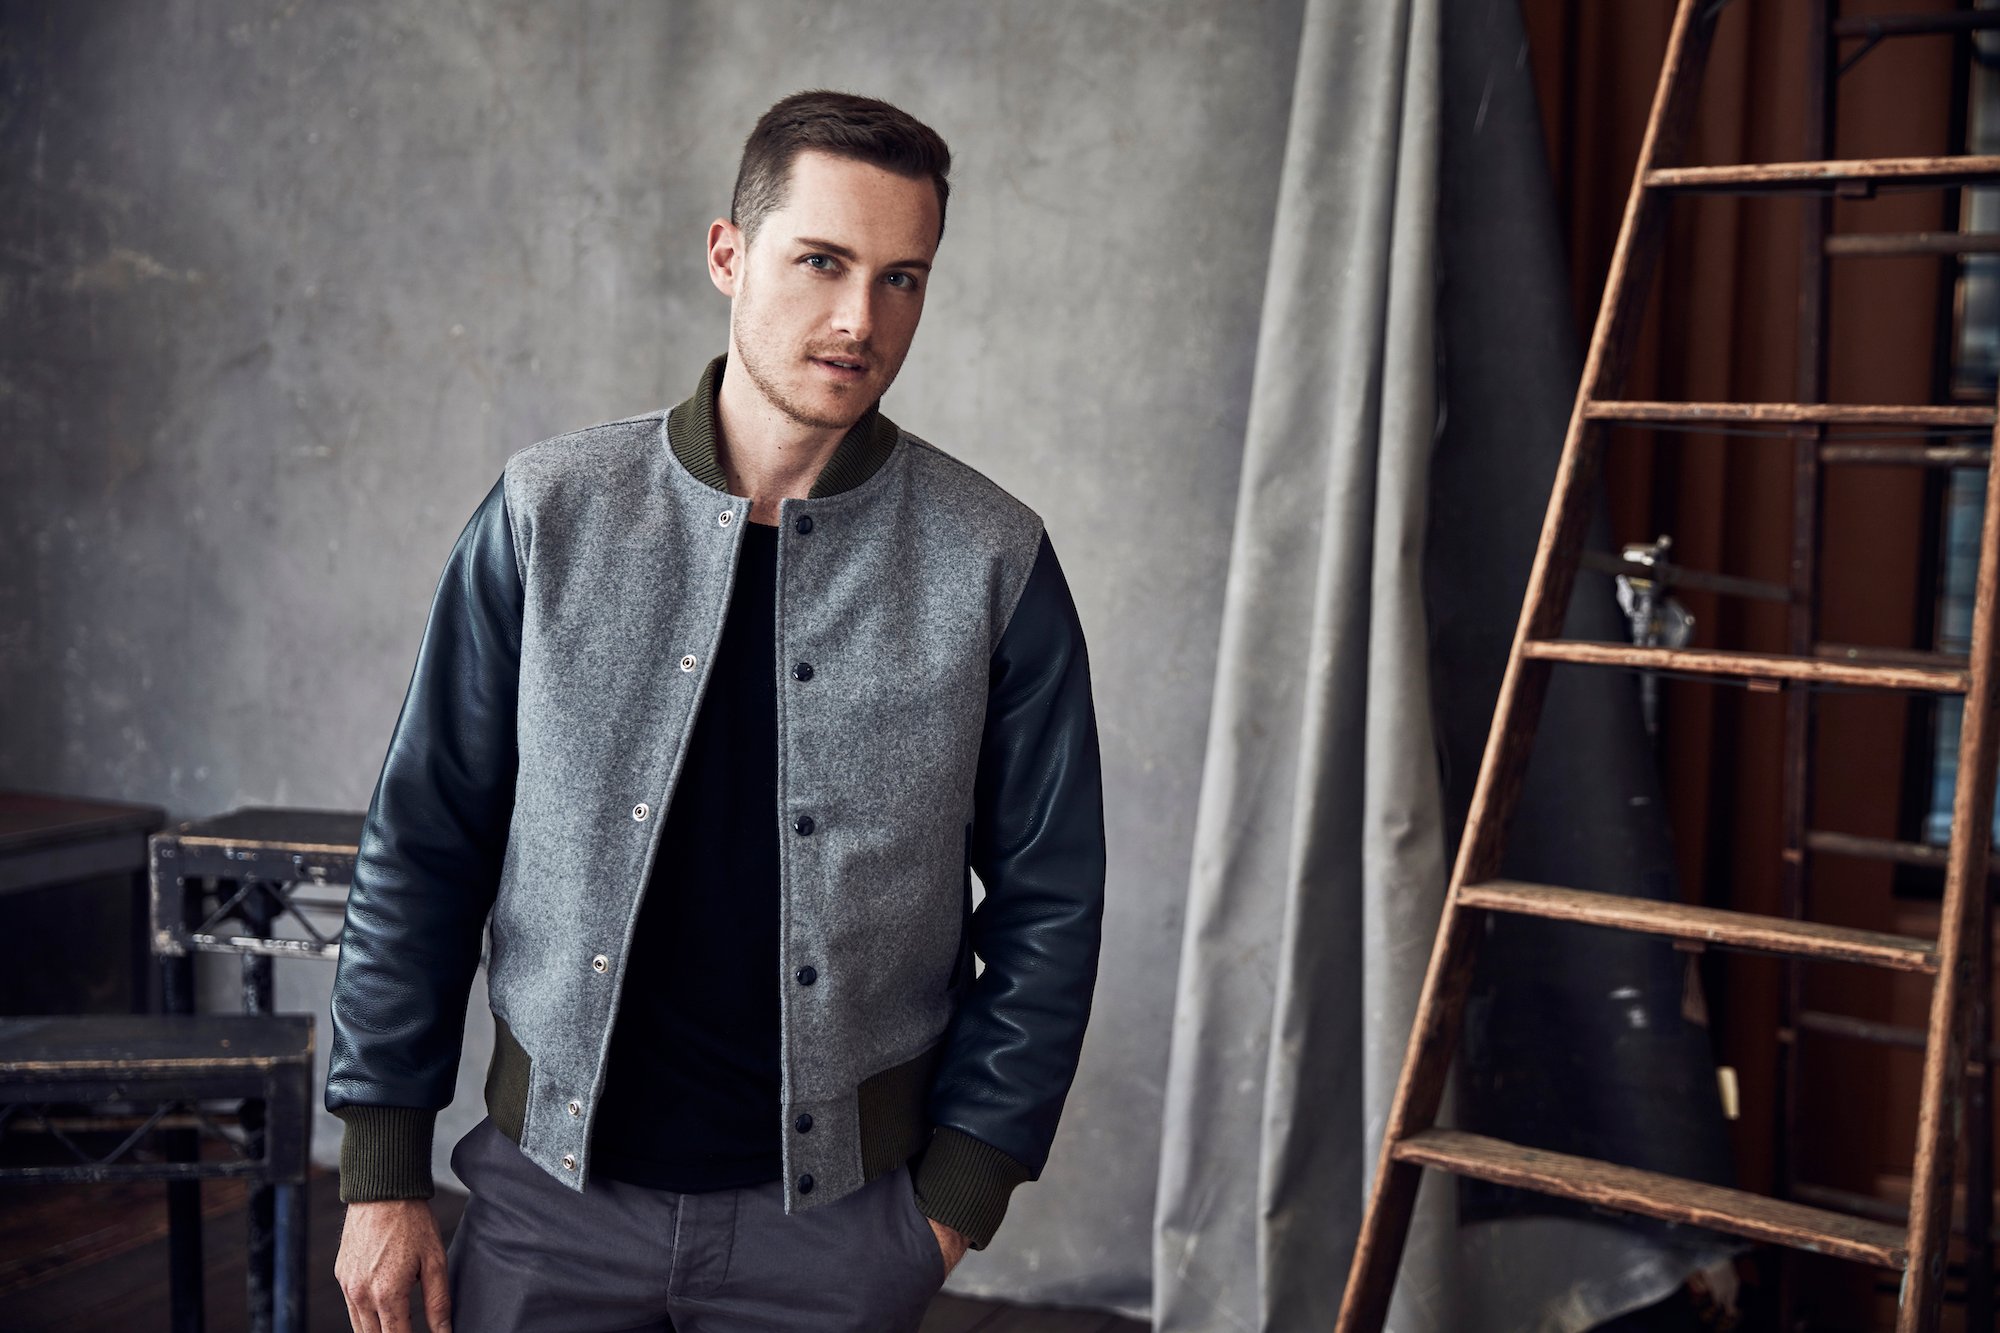 Jesse Lee Soffer posing in front of a gray curtain and a wooden ladder